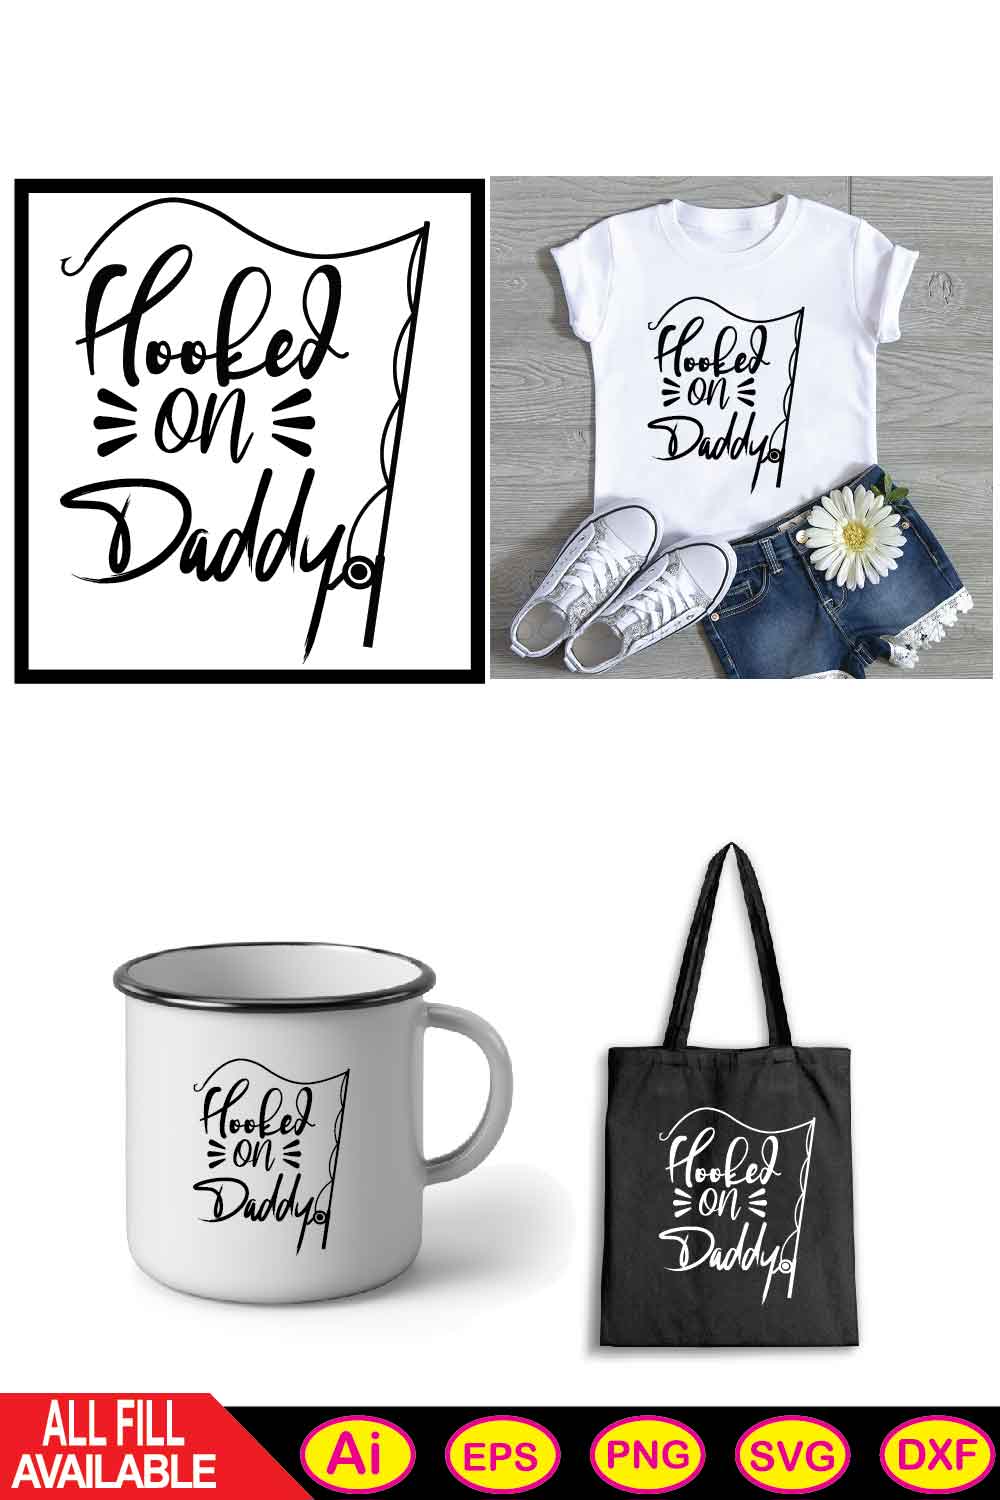 HOOKED ON daddy svg pinterest preview image.